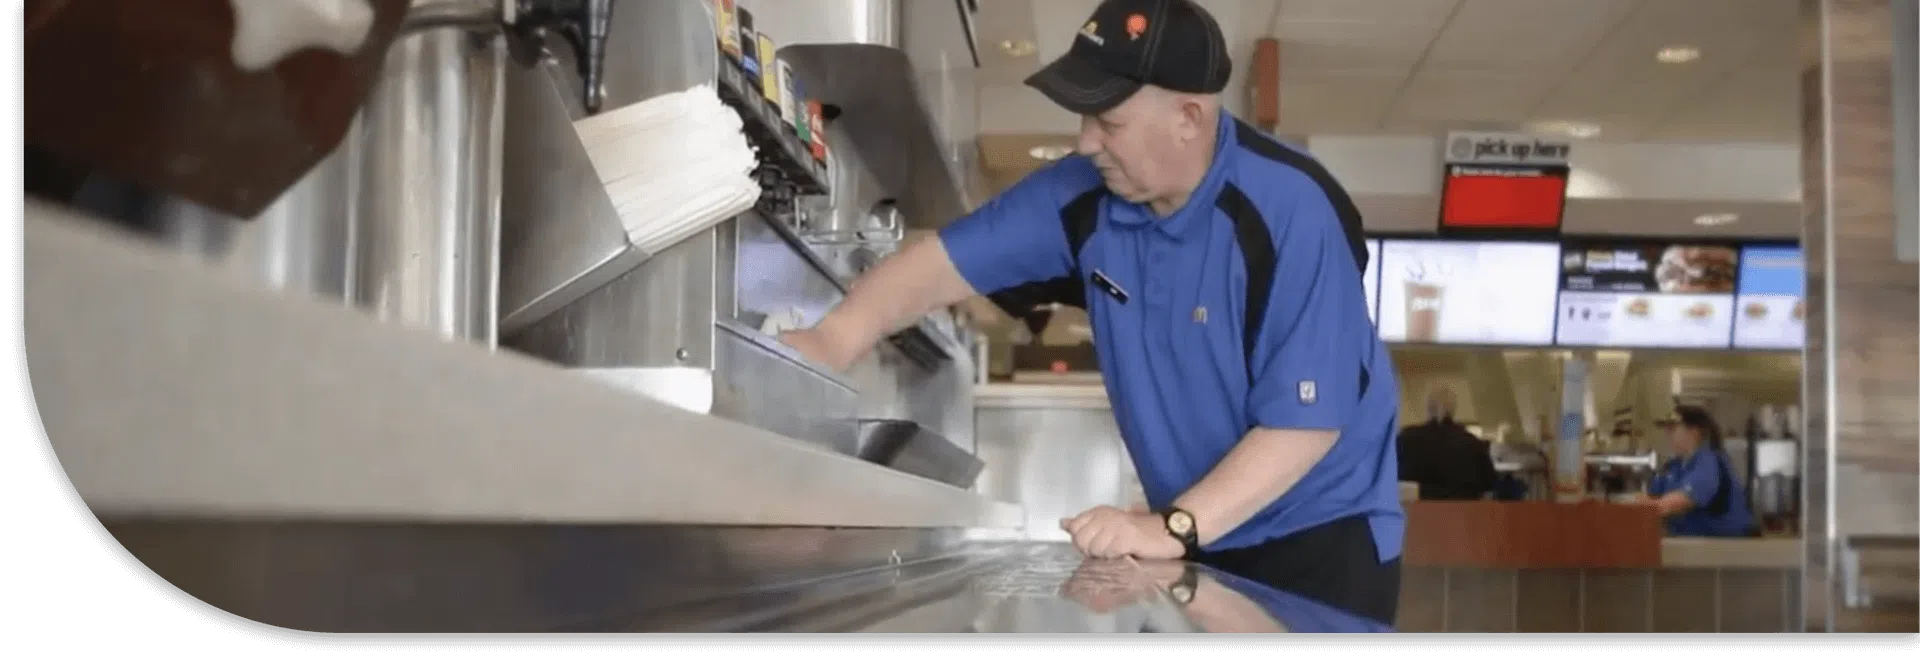 Employee cleaning soda fountain at restaurant